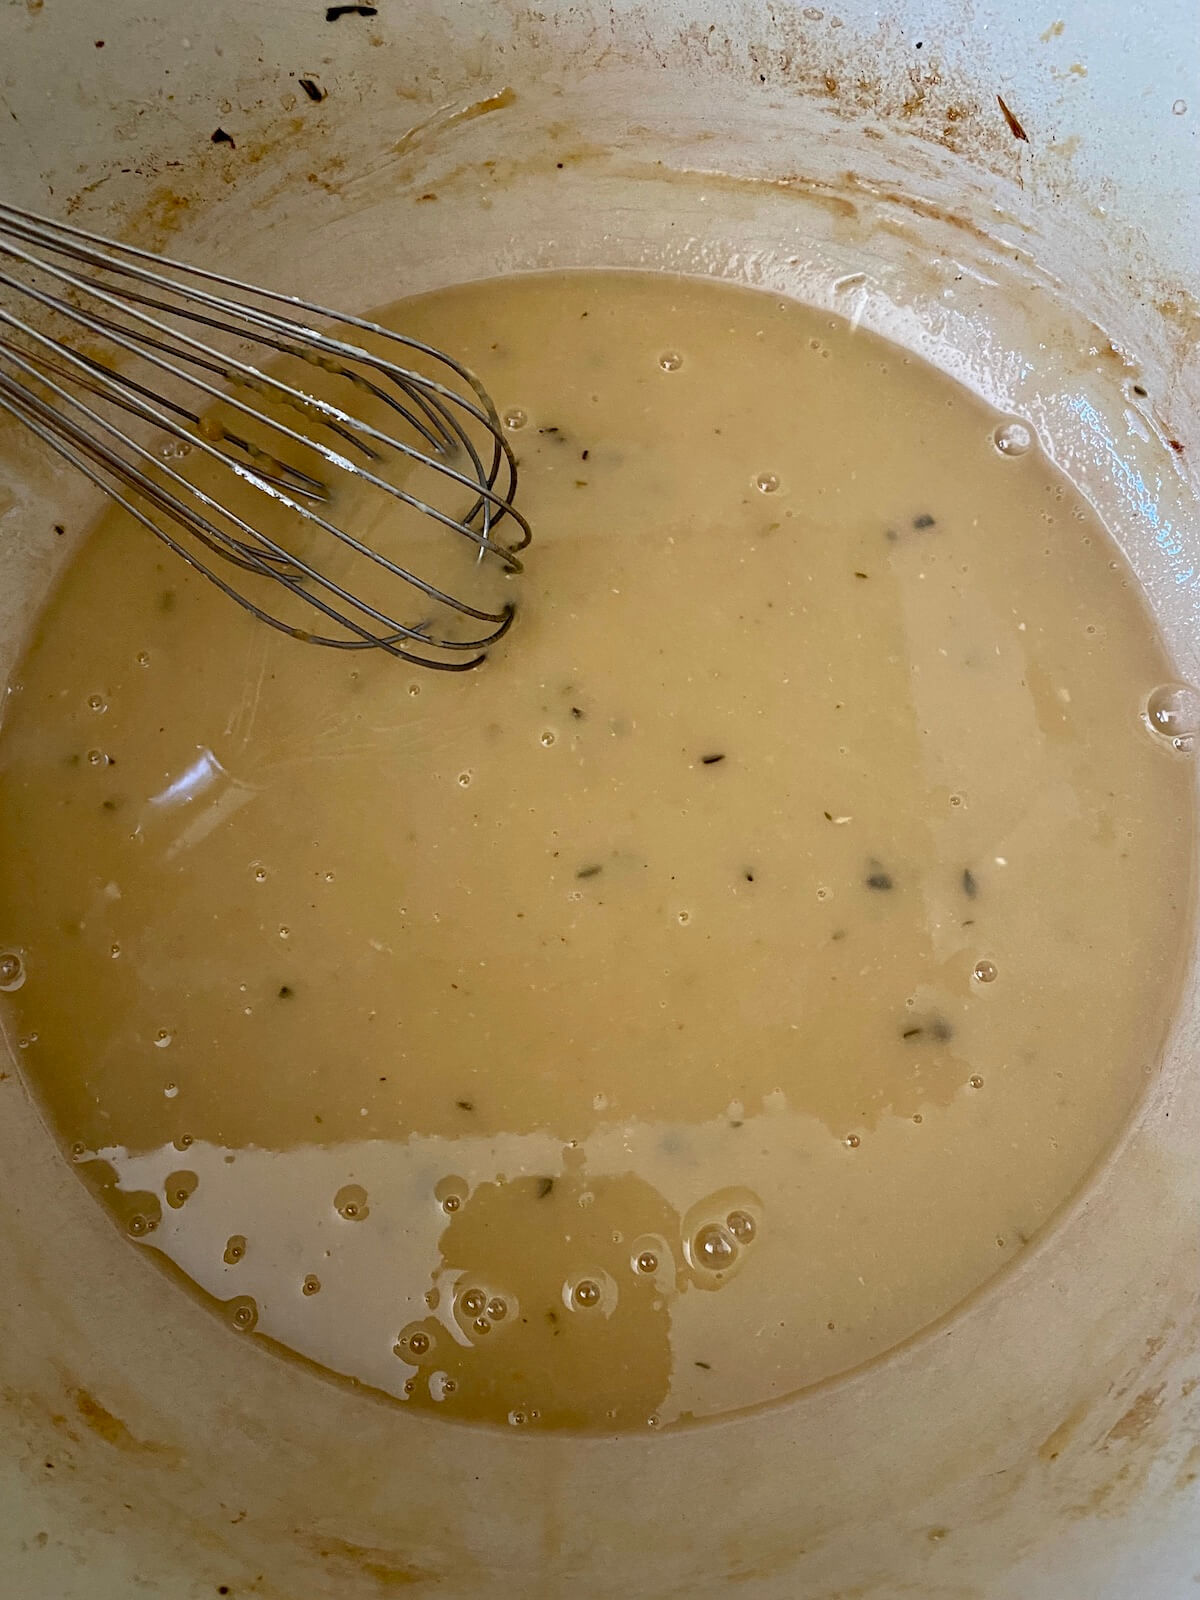 Chicken gravy simmering on the stovetop in a dutch oven. There is a whisk sticking out of the pot to the left.